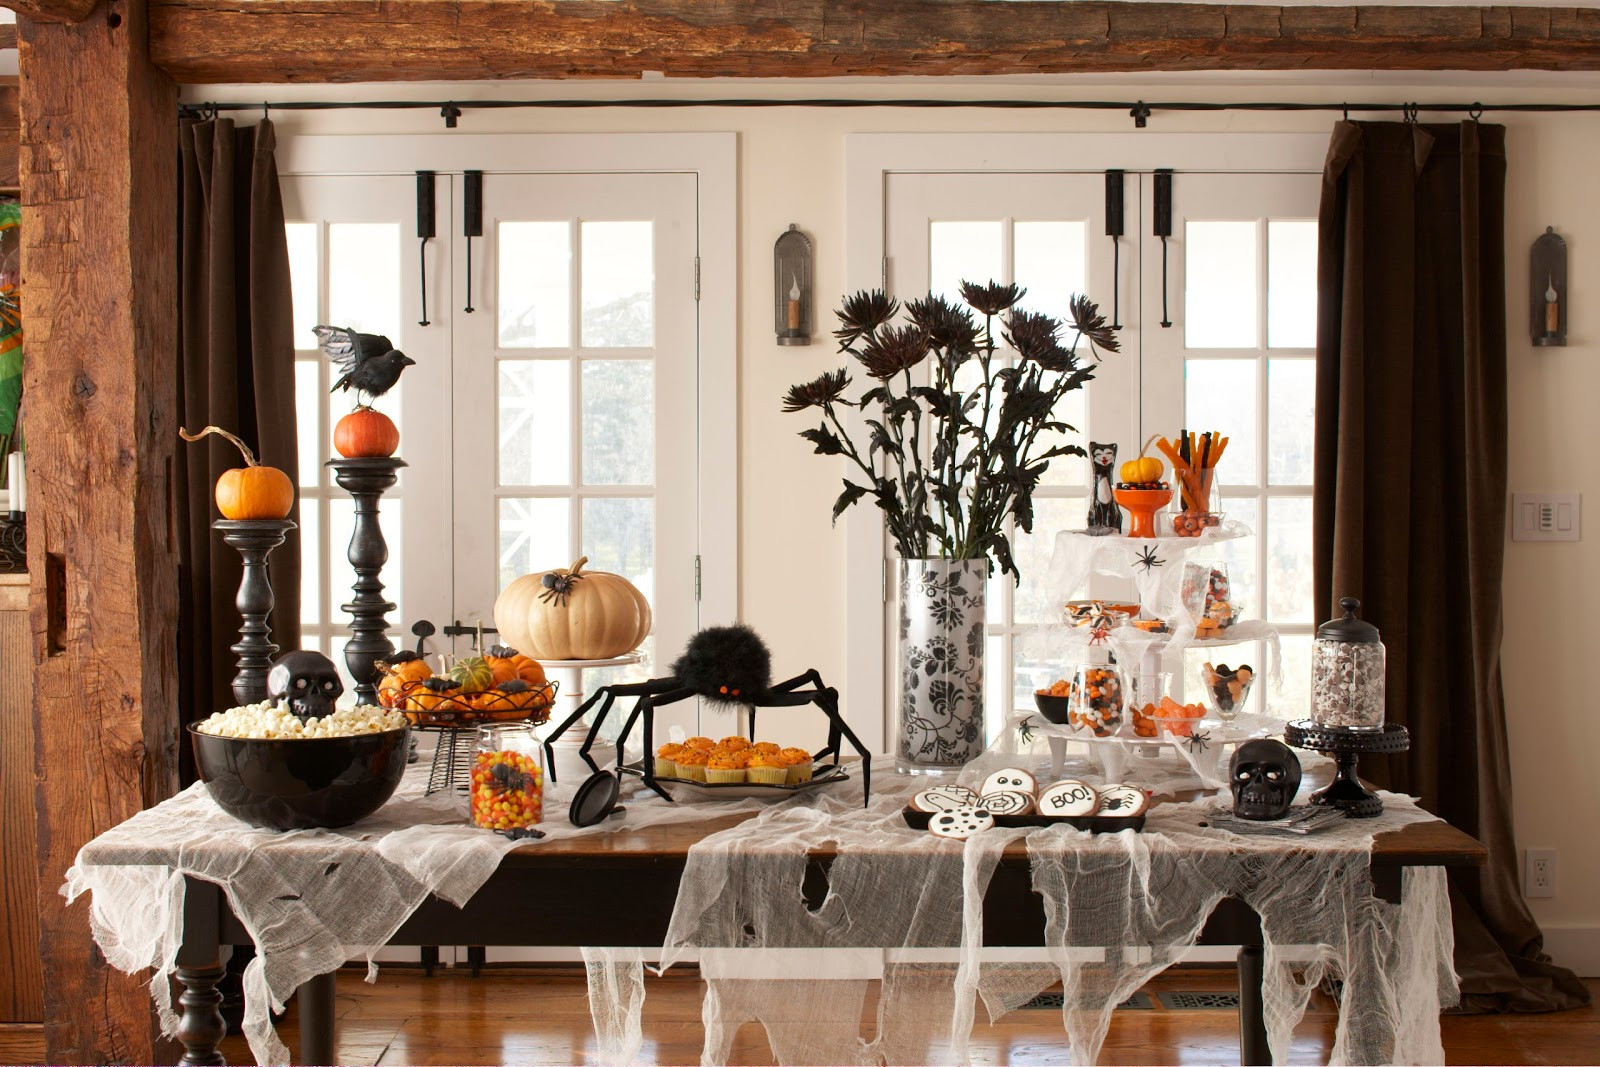 Halloween Party House Decorating Ideas
 Karin Lidbeck Clever Halloween party ideas Easy last